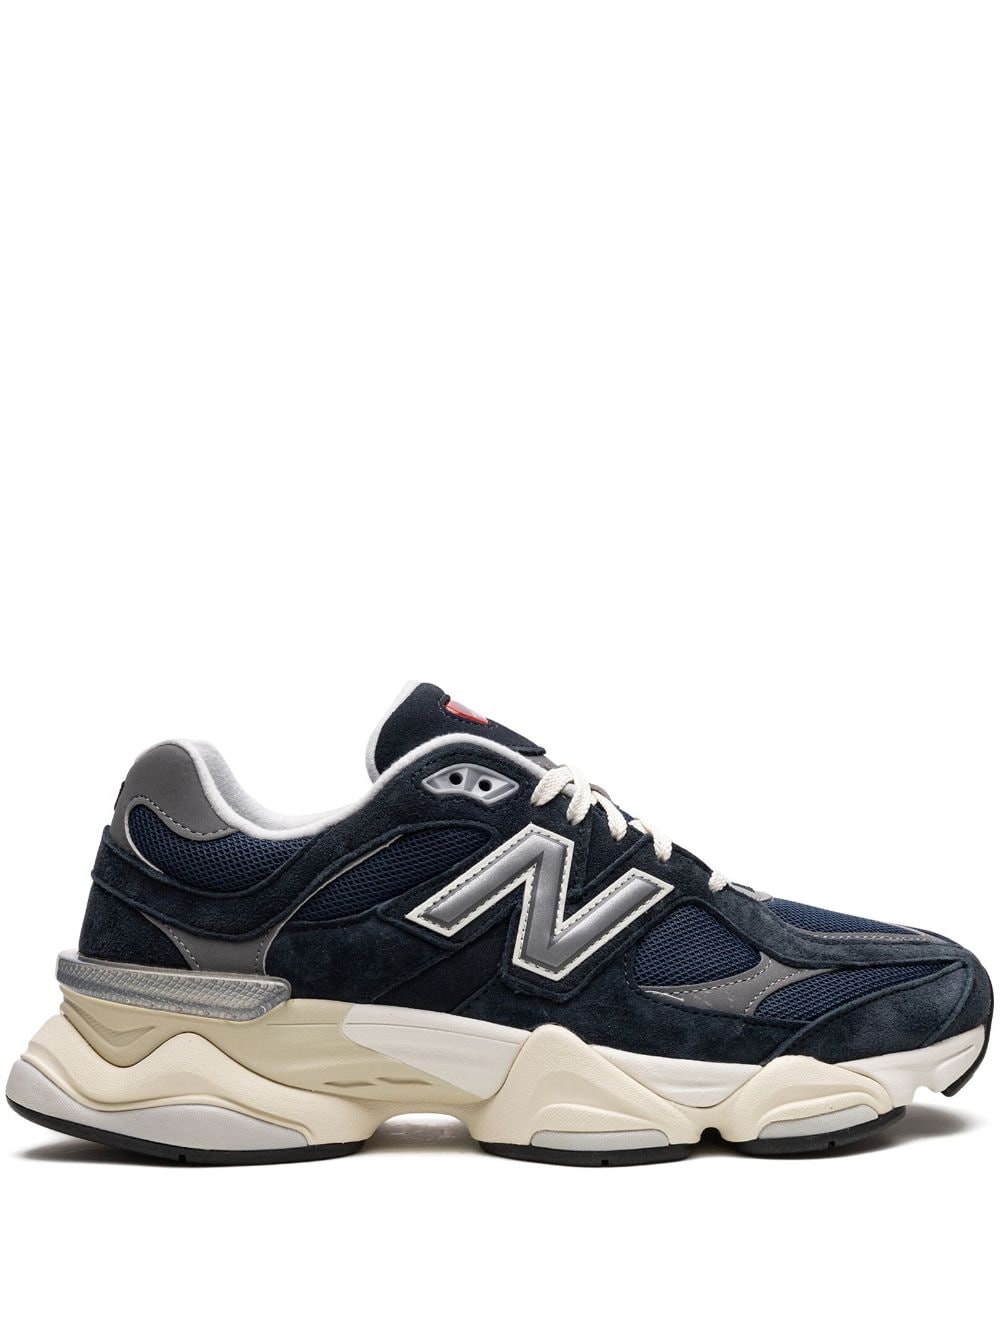 New Balance 9060 "Navy" sneakers - Blue